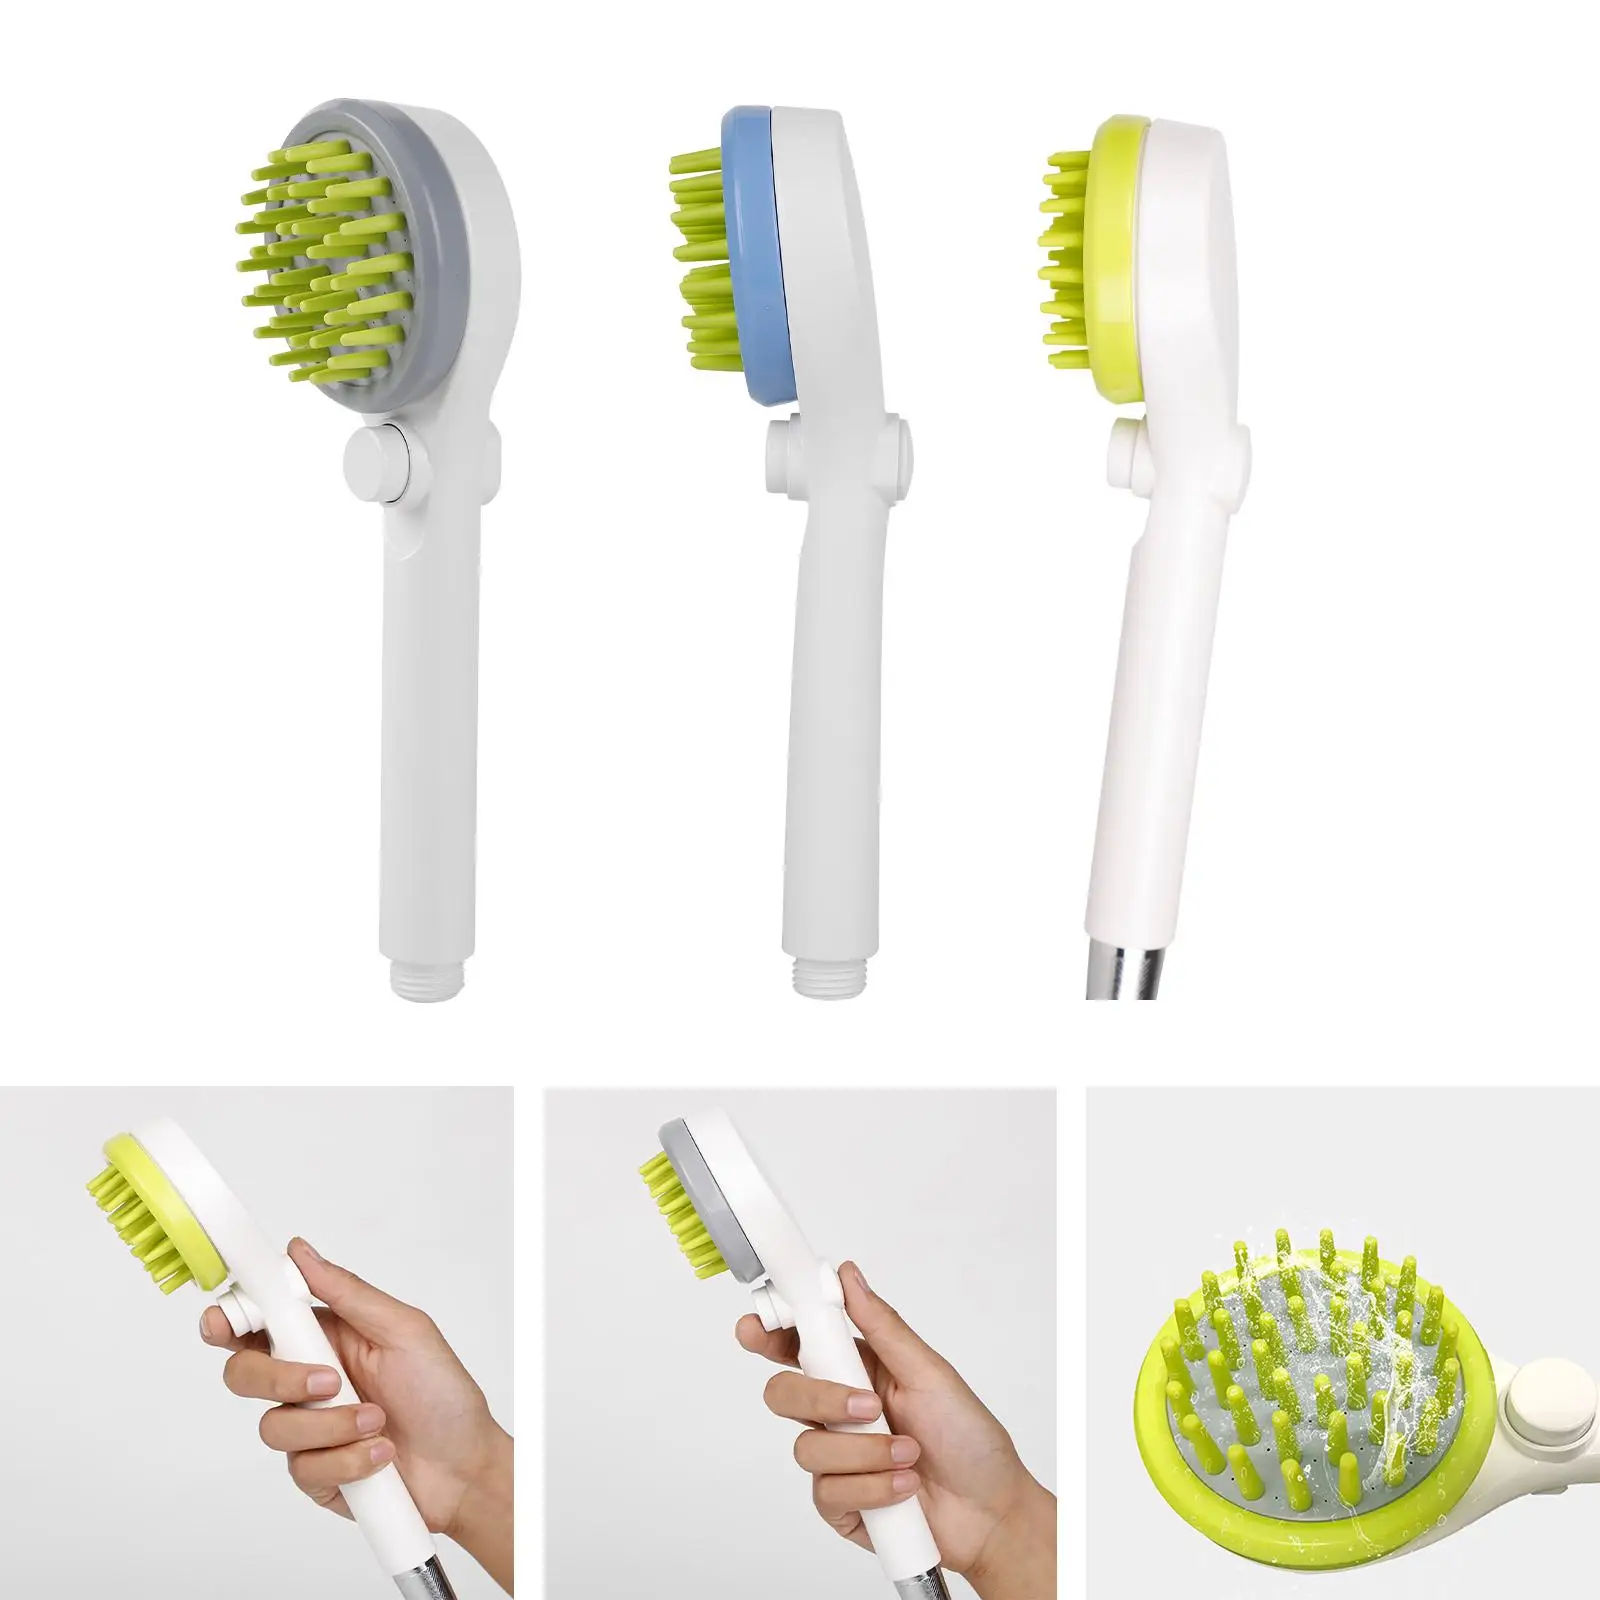 Portable Pet Comb Washer Accessories Sprinkler Grooming Comb Scrubber Shower Comb for Massaging Washing SPA Puppy Kitten